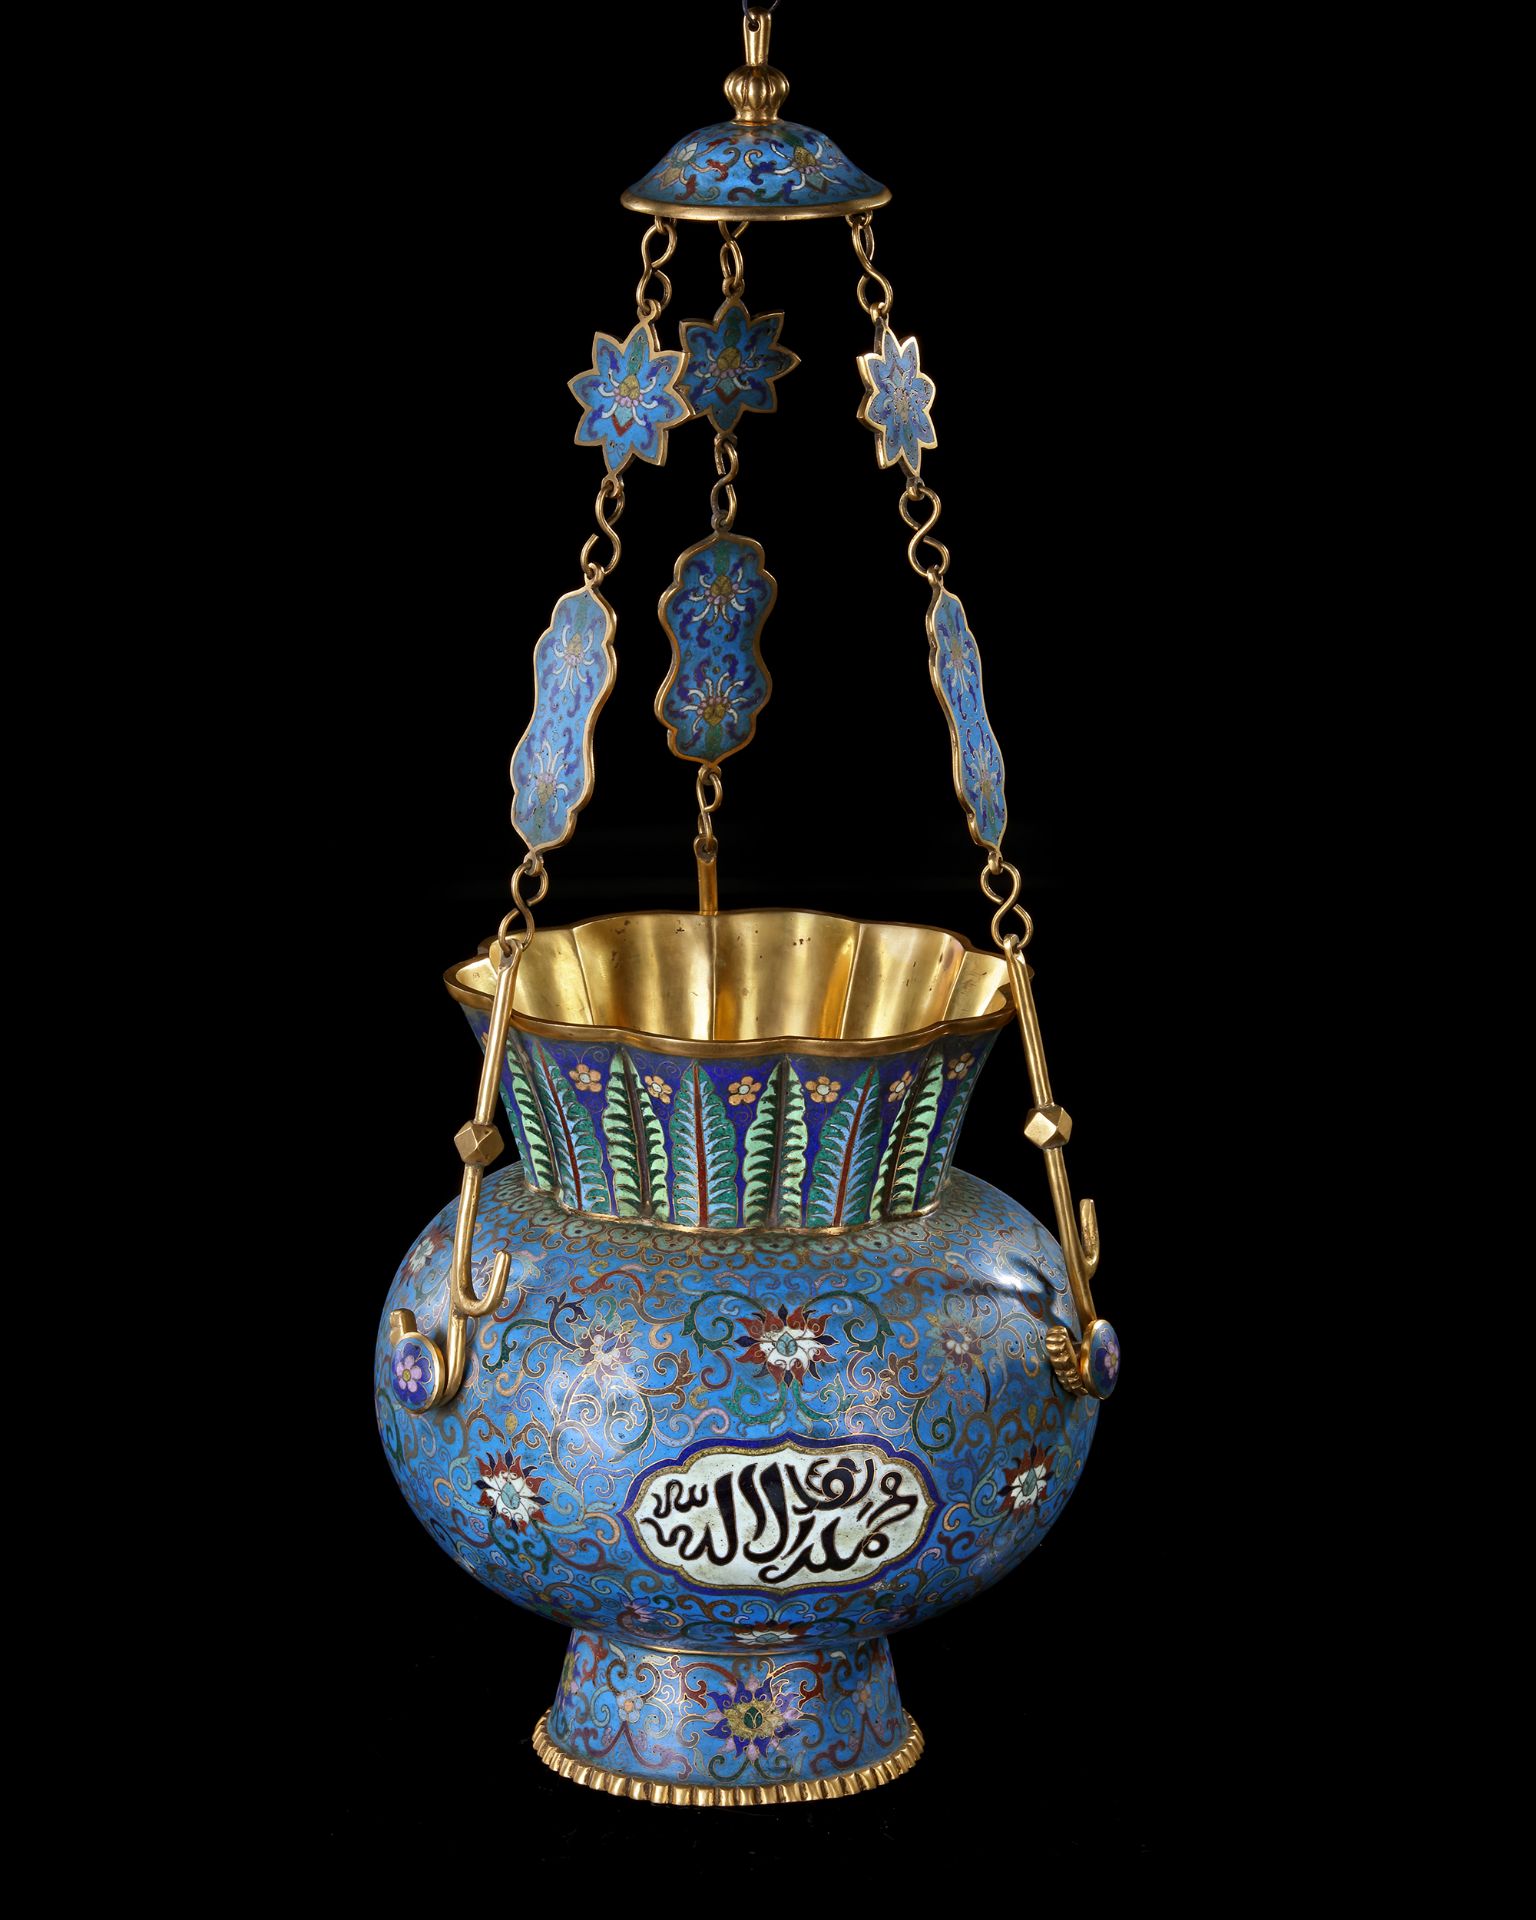 A CHINESE CLOISONNÉ MOSQUE LAMP FOR THE ISLAMIC MARKET, LATE 19TH CENTURY - Image 3 of 10